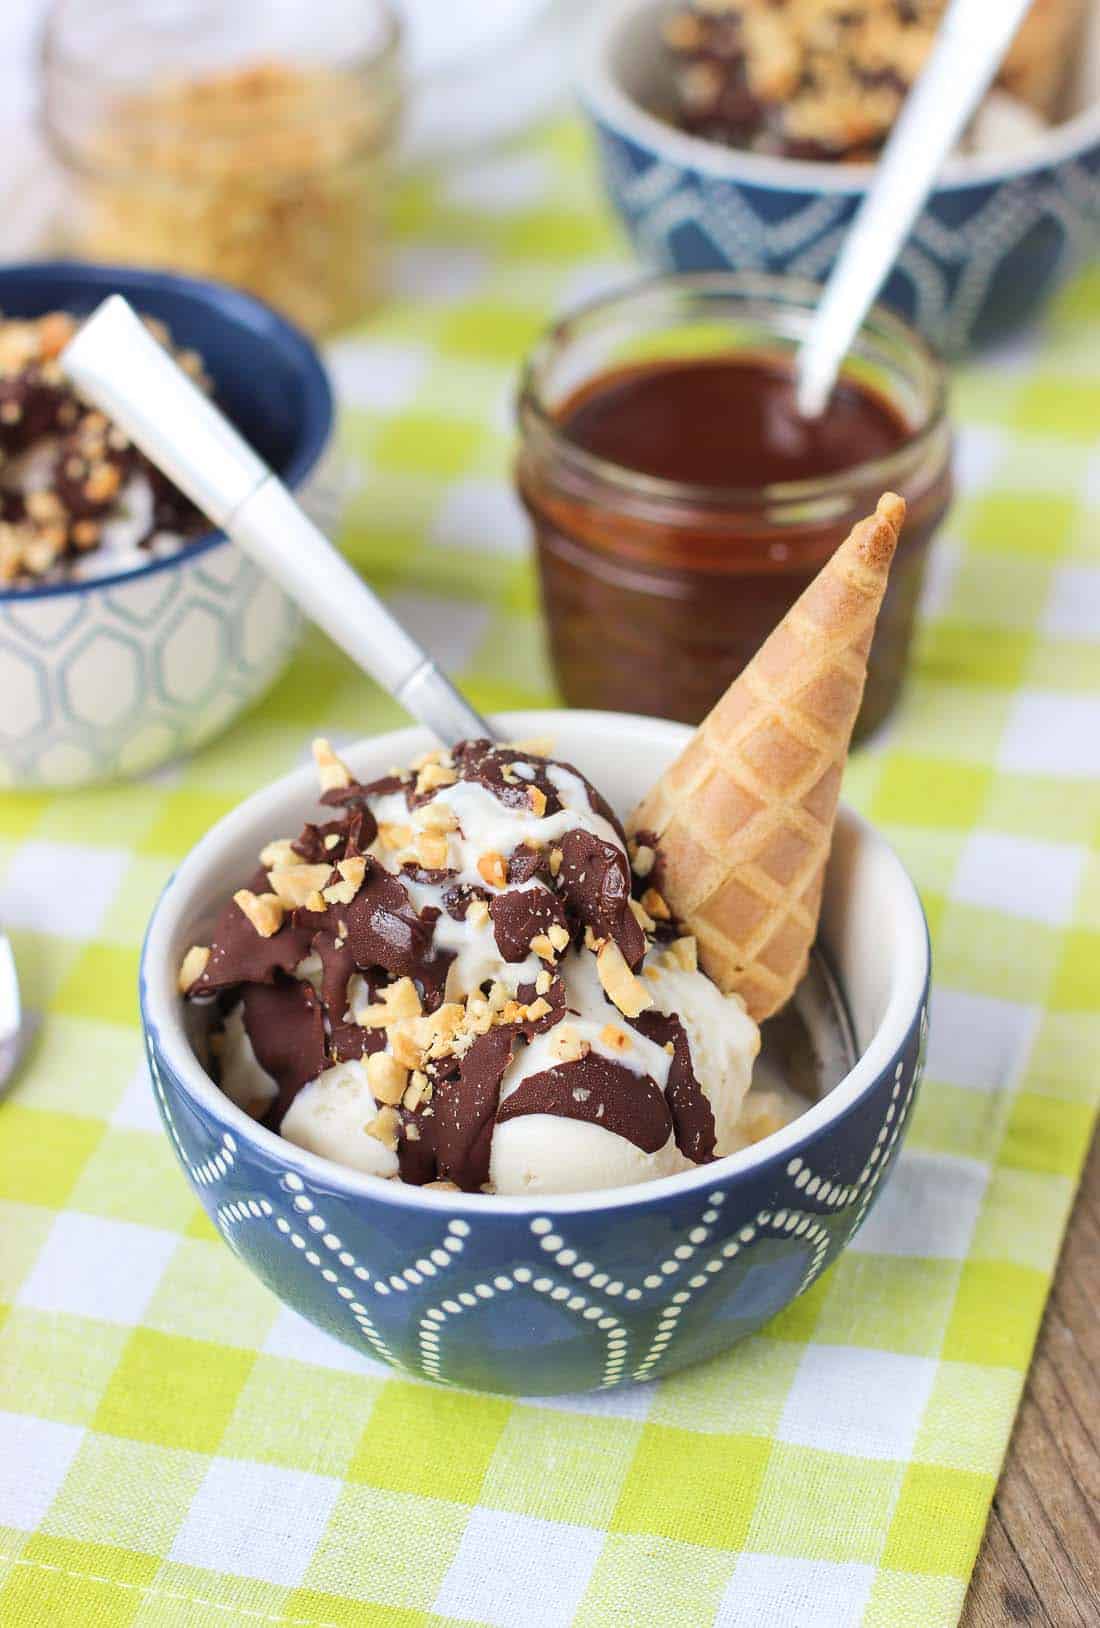 An ice cream sundae in a bowl with a spoon having cracked the hardened shell coating